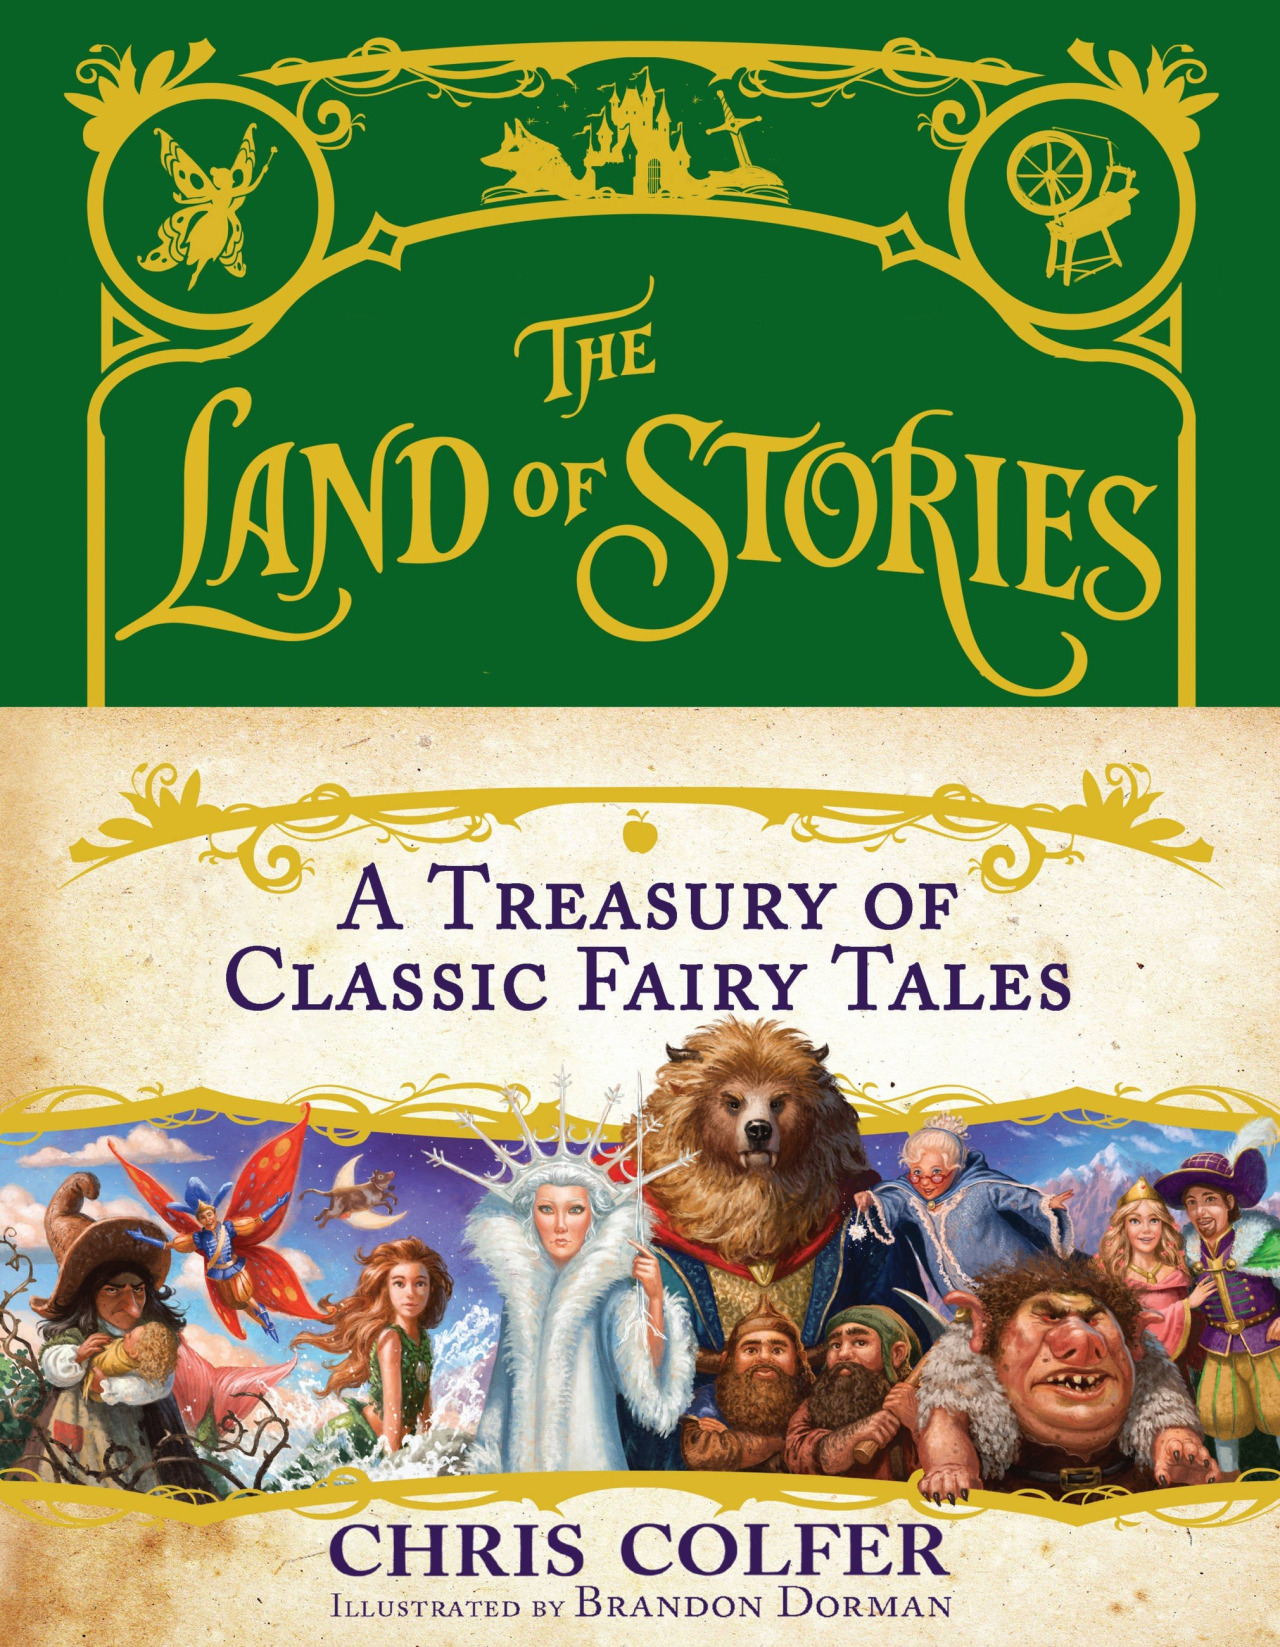 Listing Of Fairy Stories Wikipedia